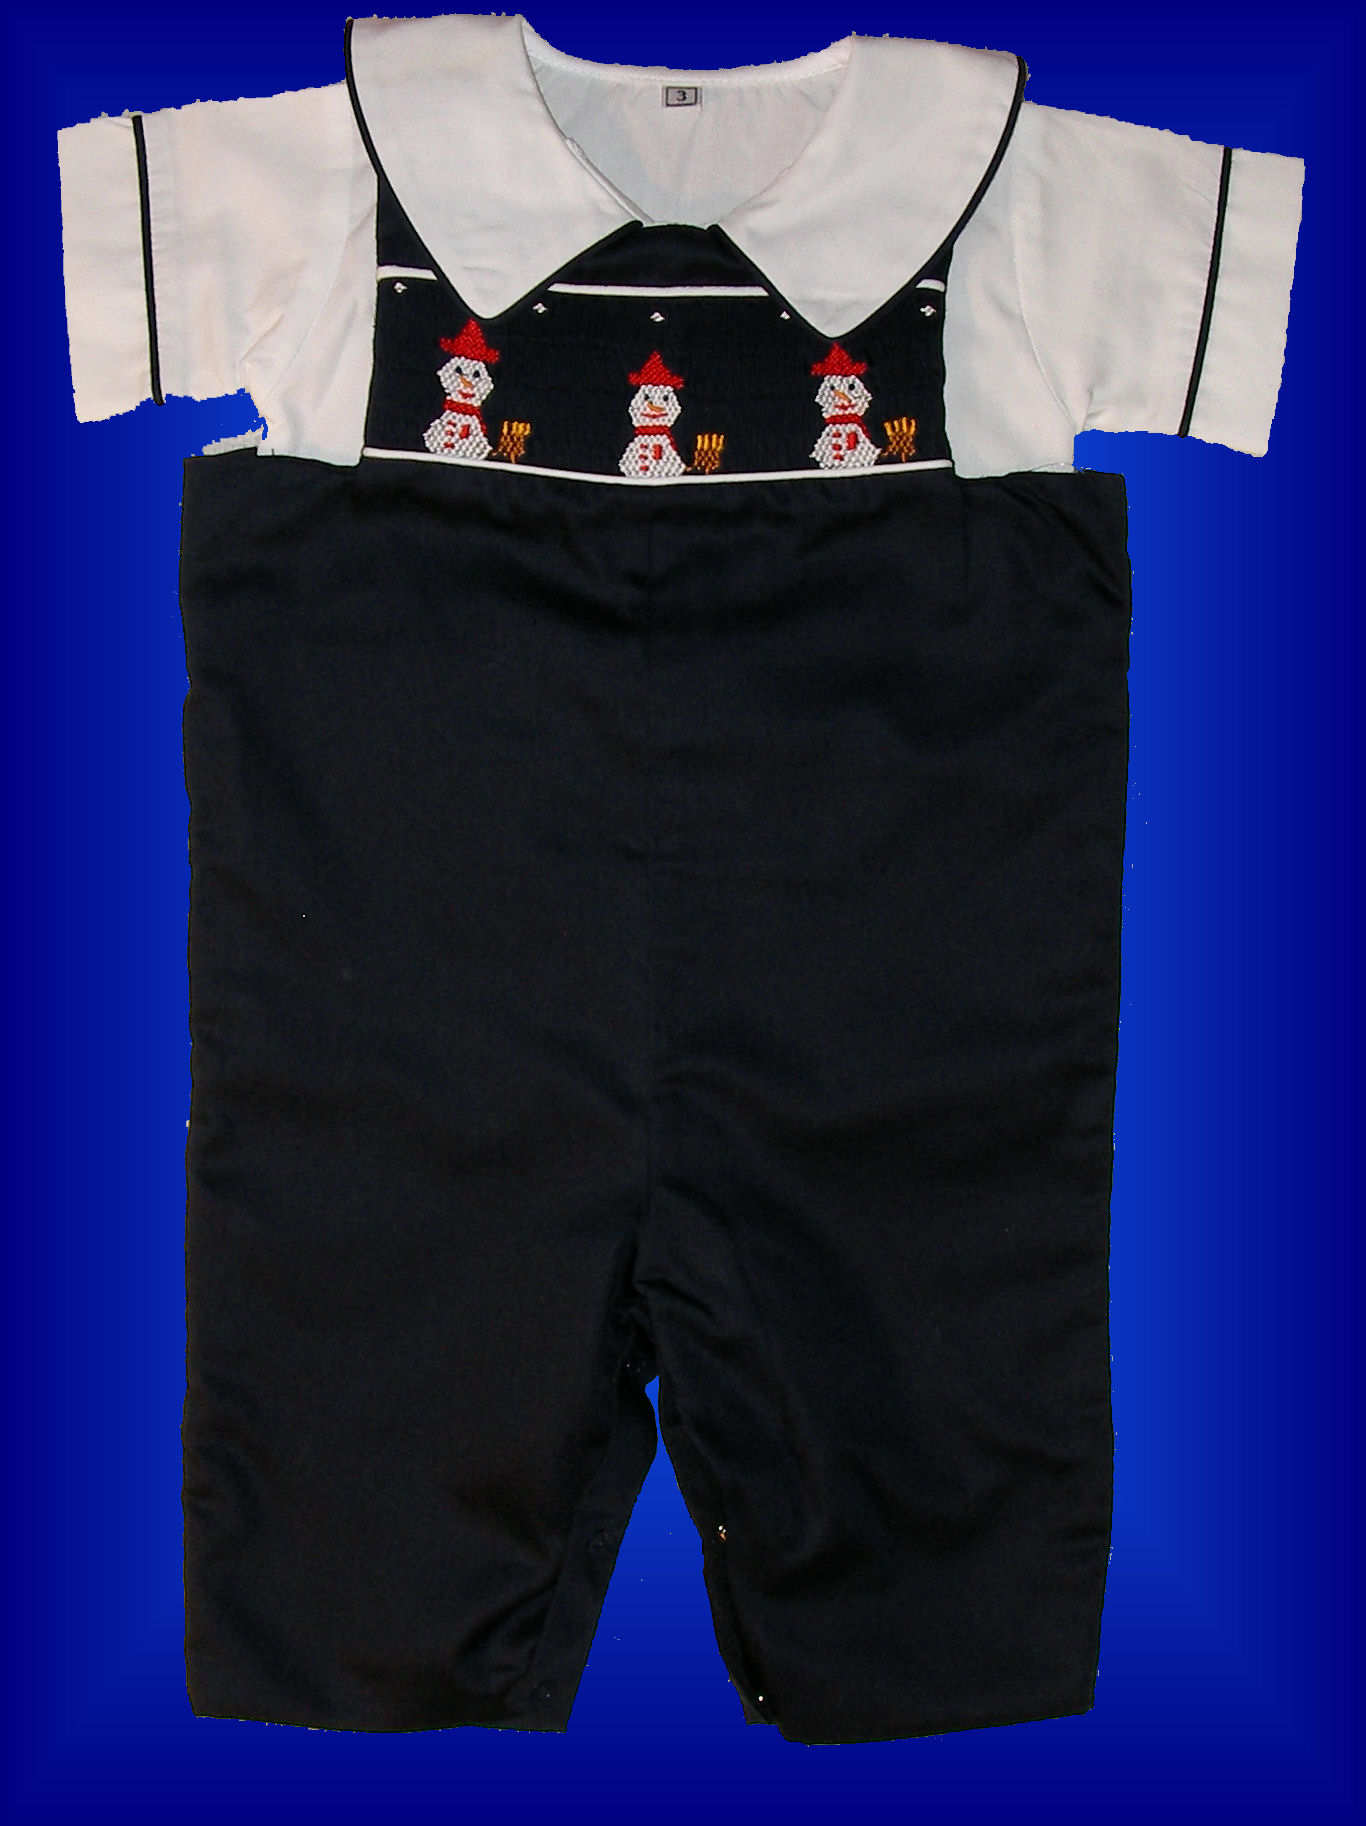 Boys Snowman Blue Shortalls - Romper - Shirt - Set _FREE Shipping Temporarily out of Stack